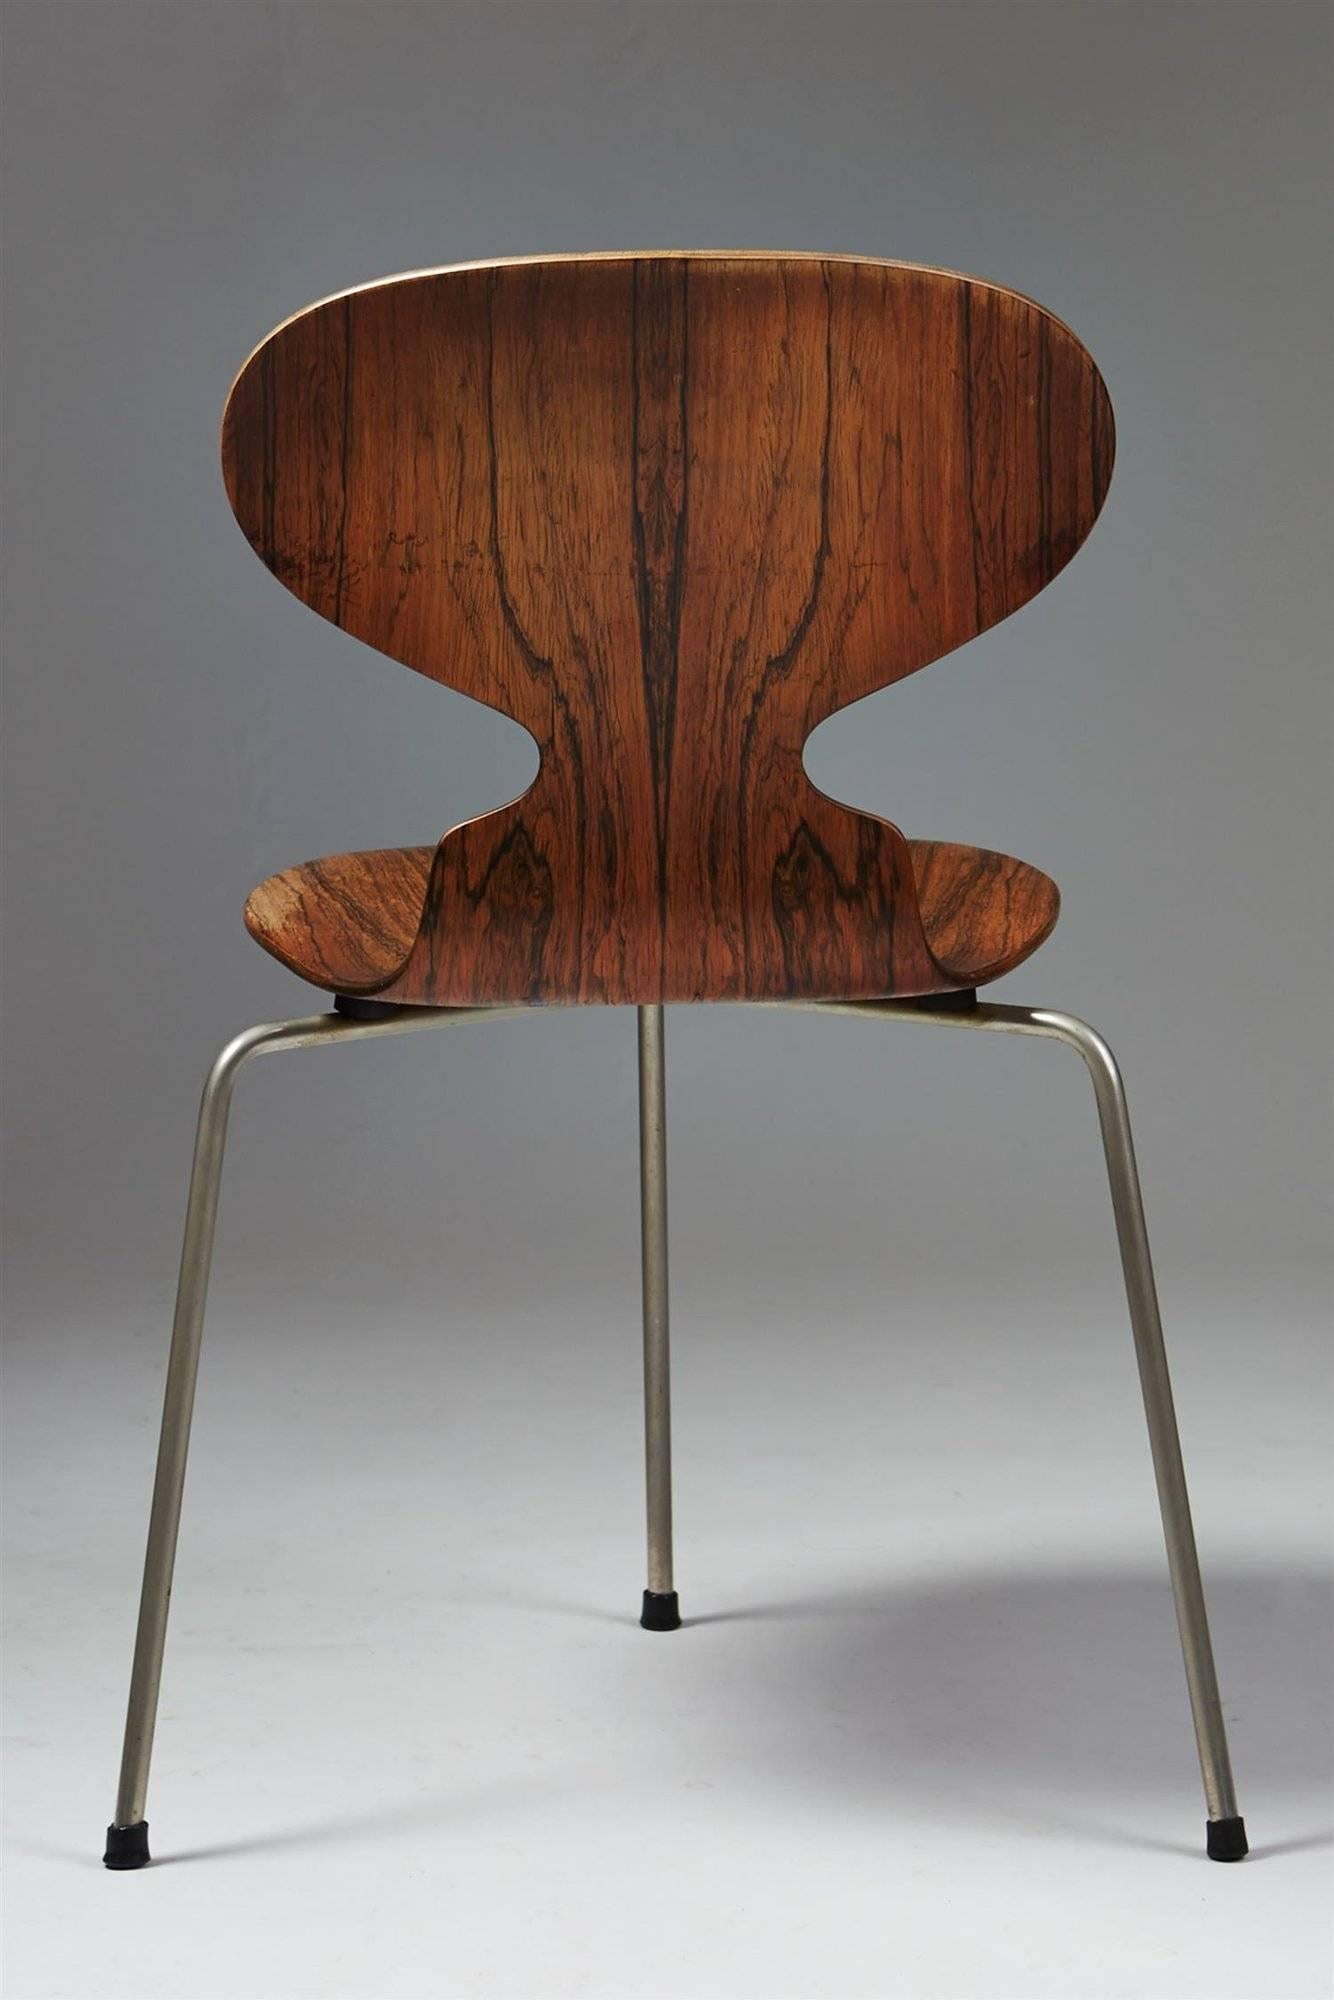 Mid-20th Century Dining Table and Four Chairs, Designed by Arne Jacobsen for Fritz Hansen